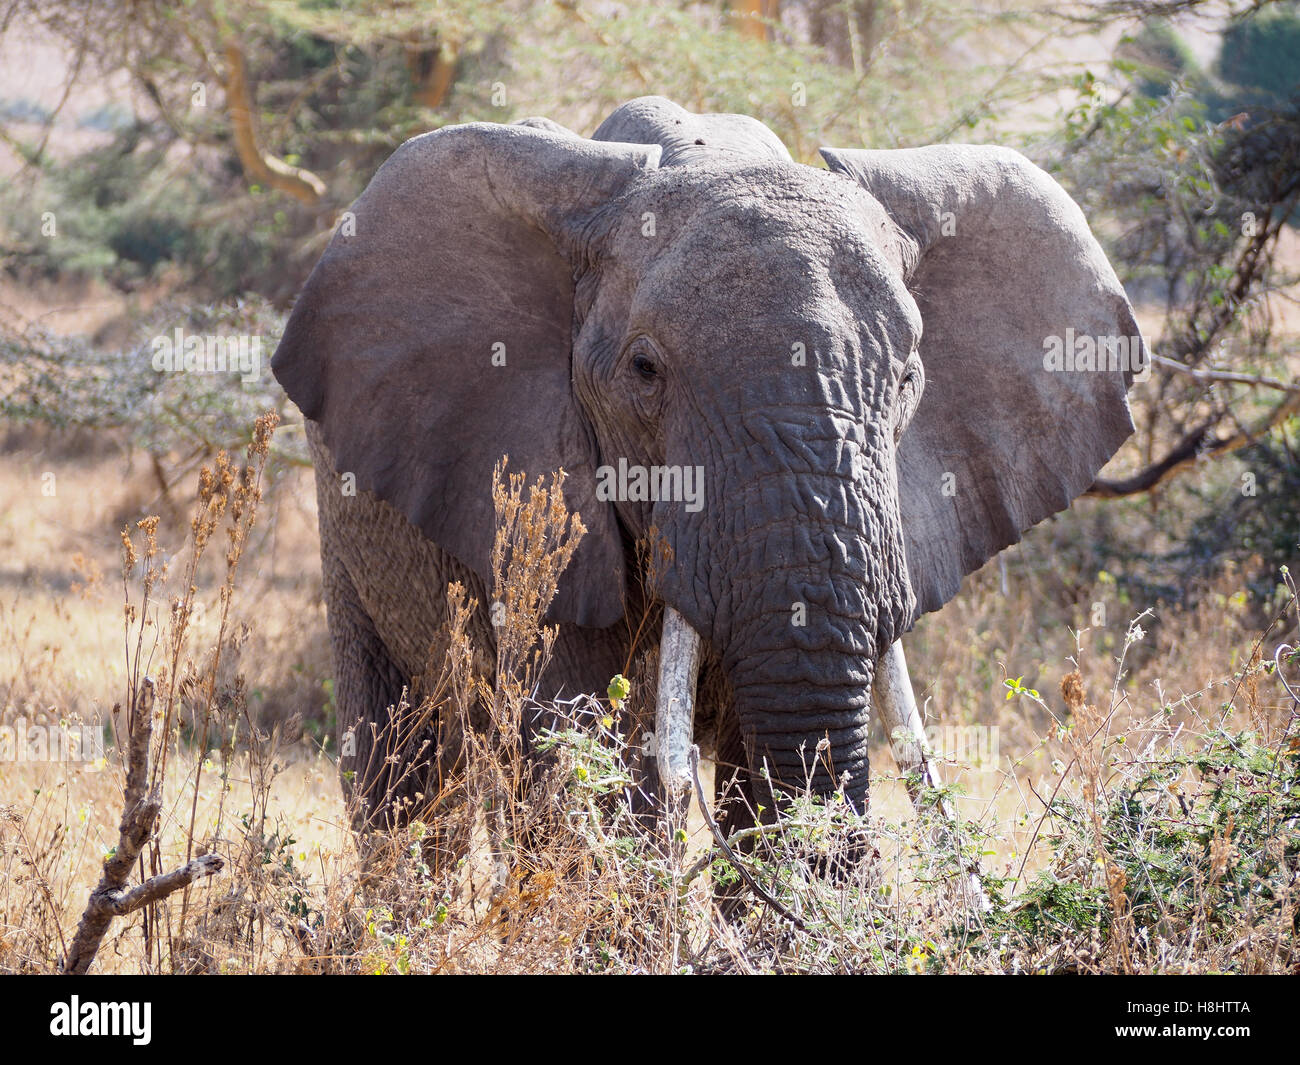 Close-up front view of an elephant in the Ngorongoro Conservation Area Tanzania Africa Stock Photo